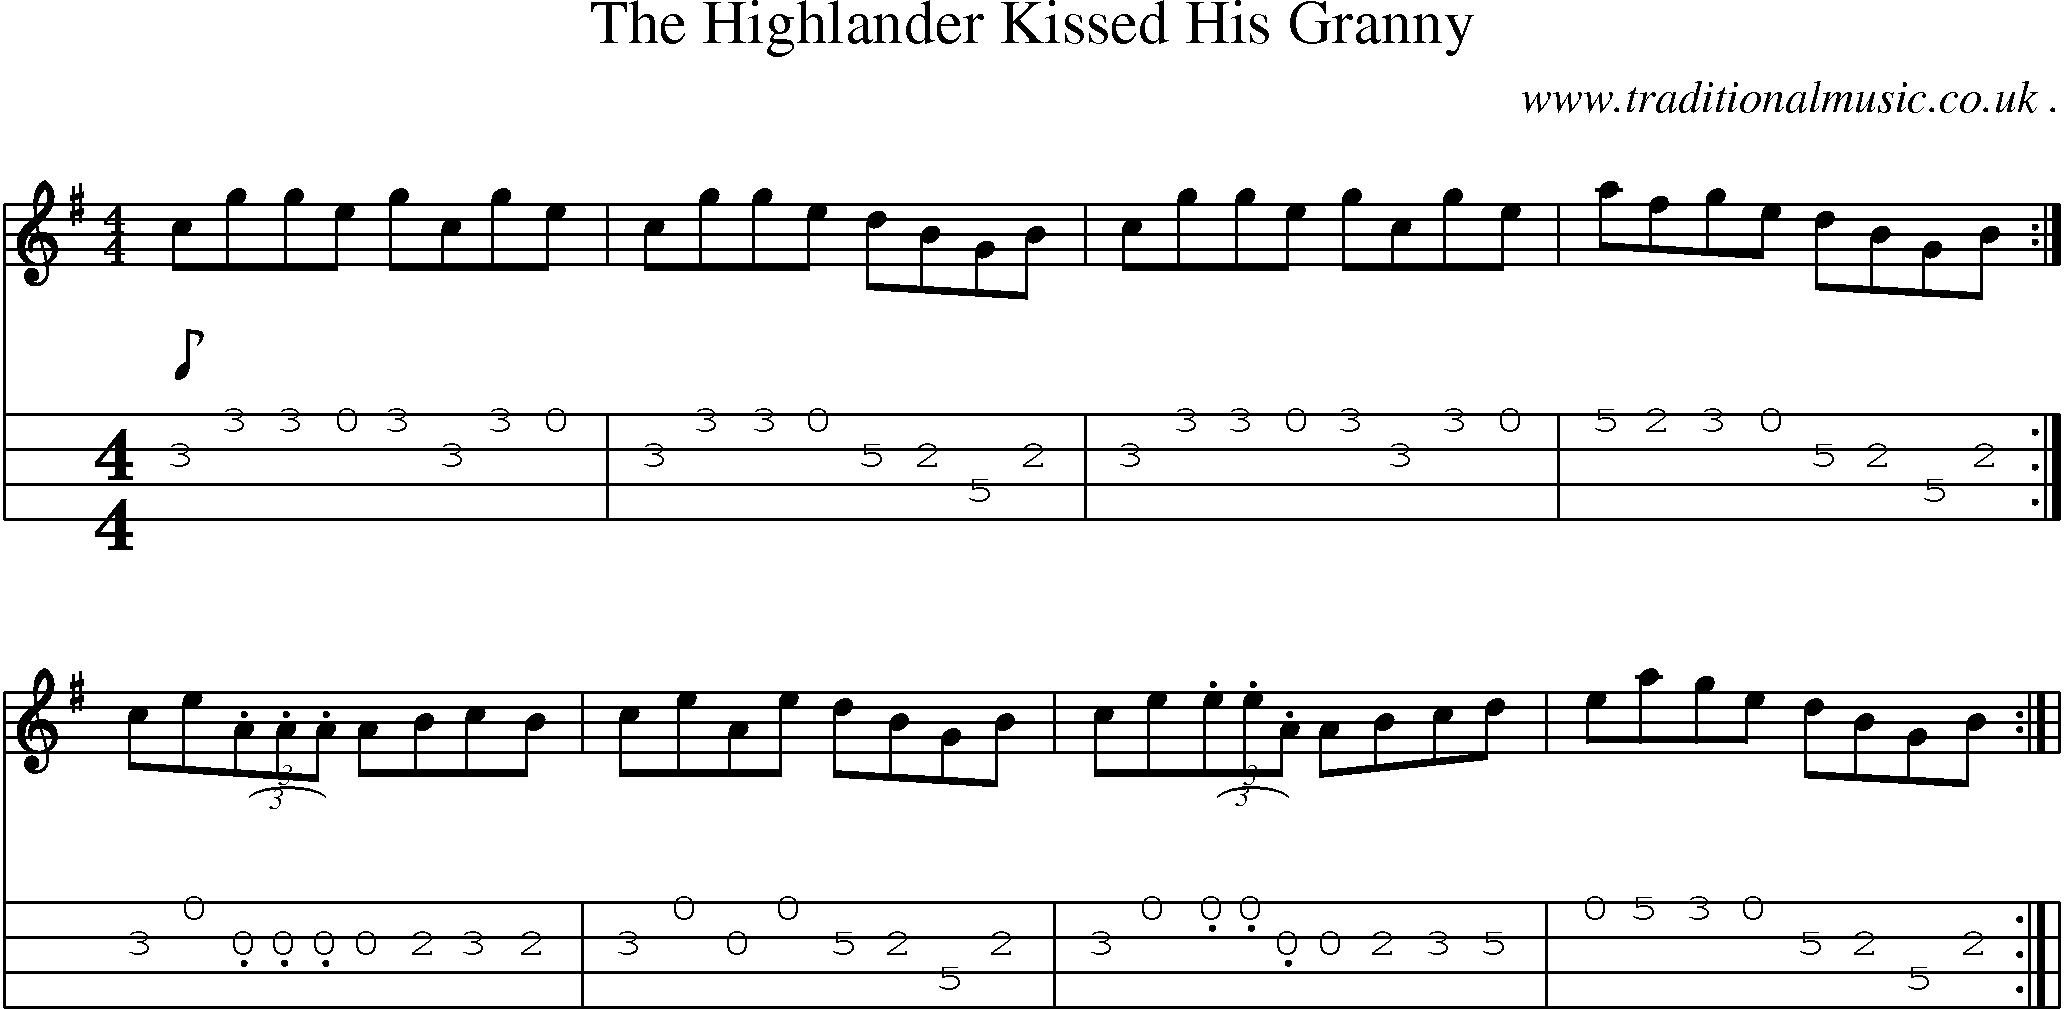 Sheet-Music and Mandolin Tabs for The Highlander Kissed His Granny